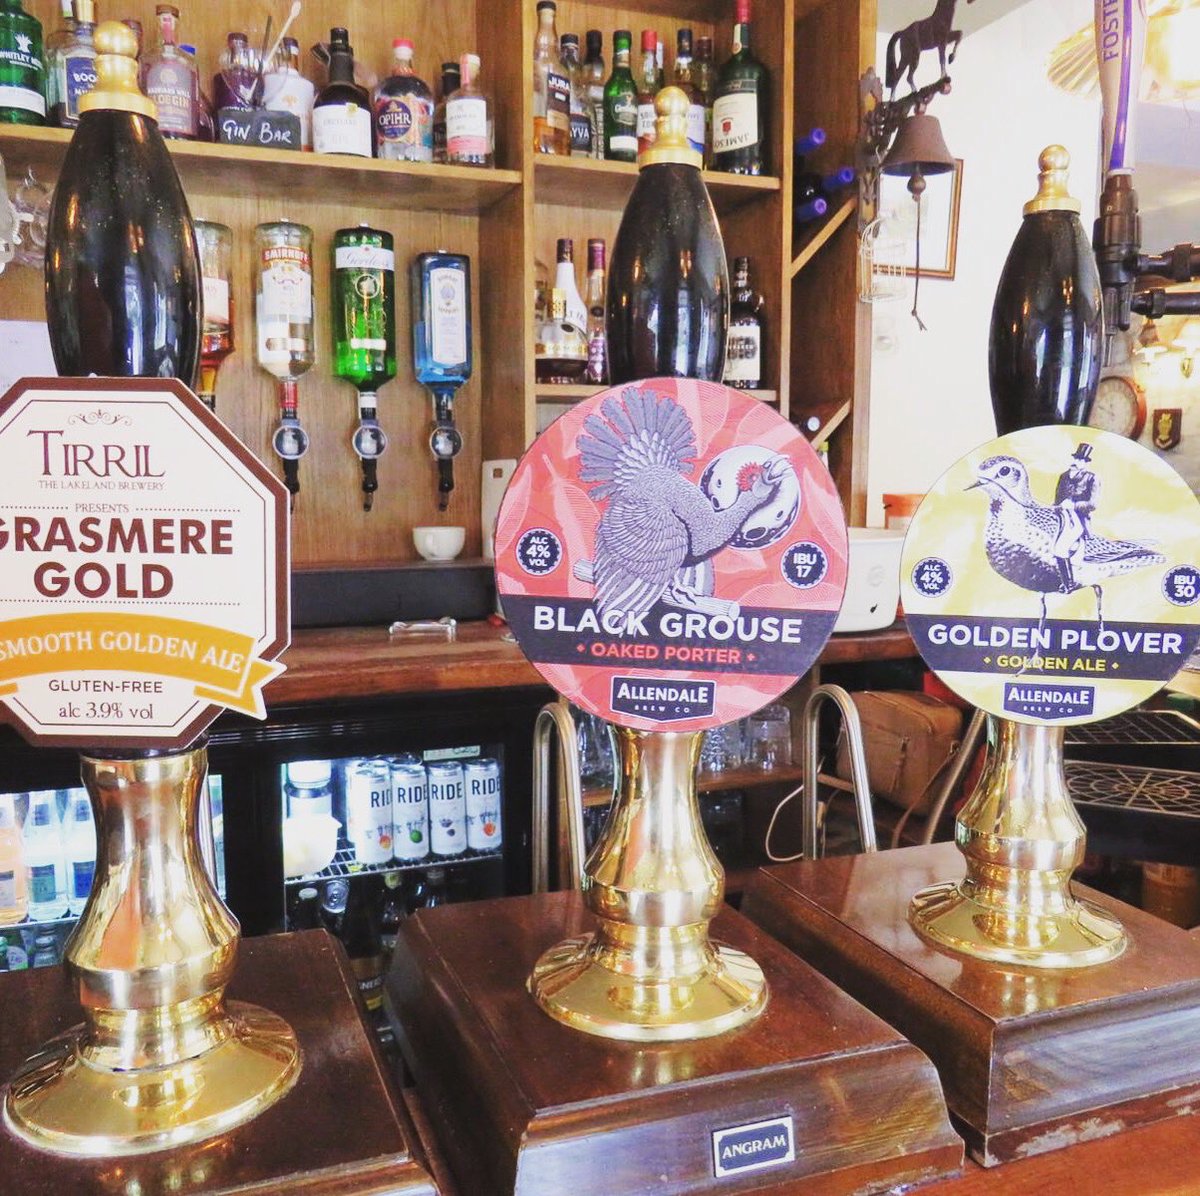 This weeks #Local #RealAle #CraftBeer @AllendaleBrewCo @tirrilbrewery #GlutenFree #BeerGarden #Delicious #Golden #Porter #GoodSelection #PubSnacks #BarTapas #LakeDistrict #Cumbria @VisitEden @VisitKeswick @VisitCumbria @CAMRA_Official @Lakes_and_Ale @FurnessCAMRA @blackpoolcamra